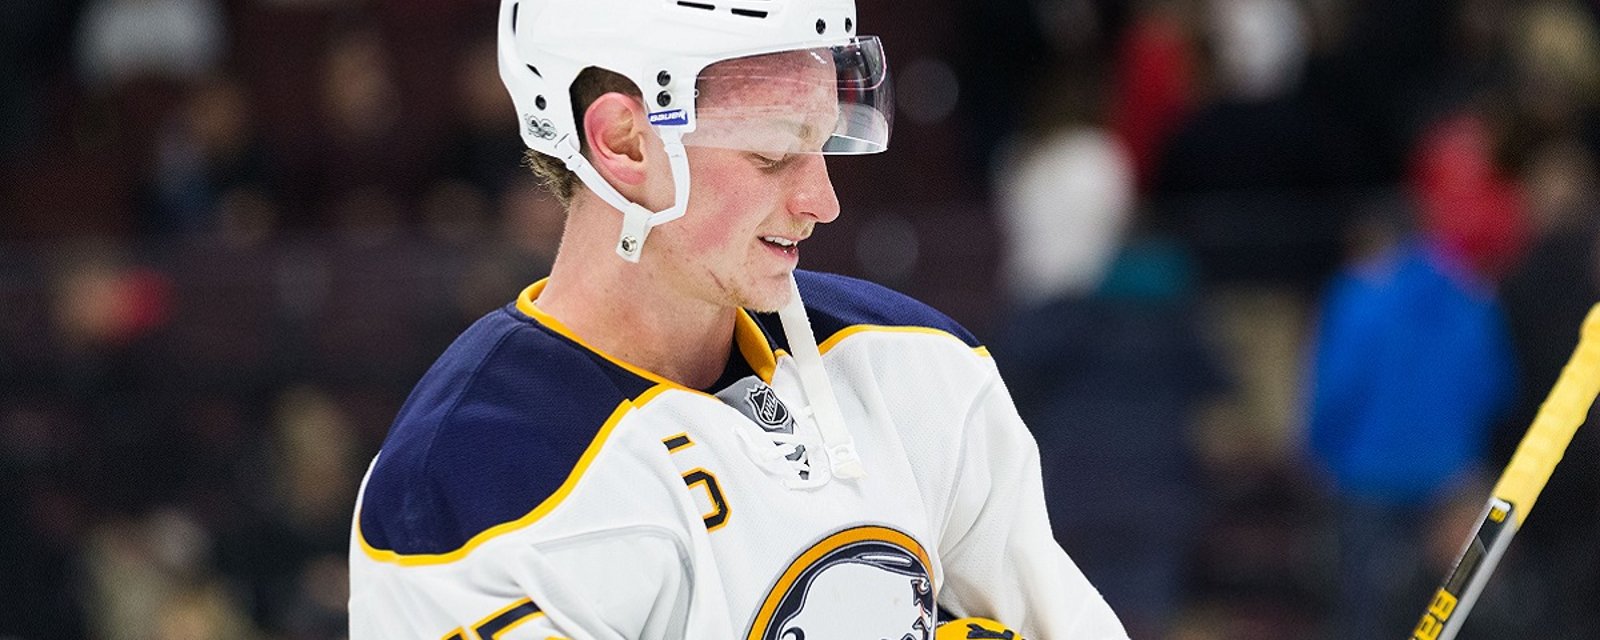 Eichel records his 100th point in just his second NHL season.